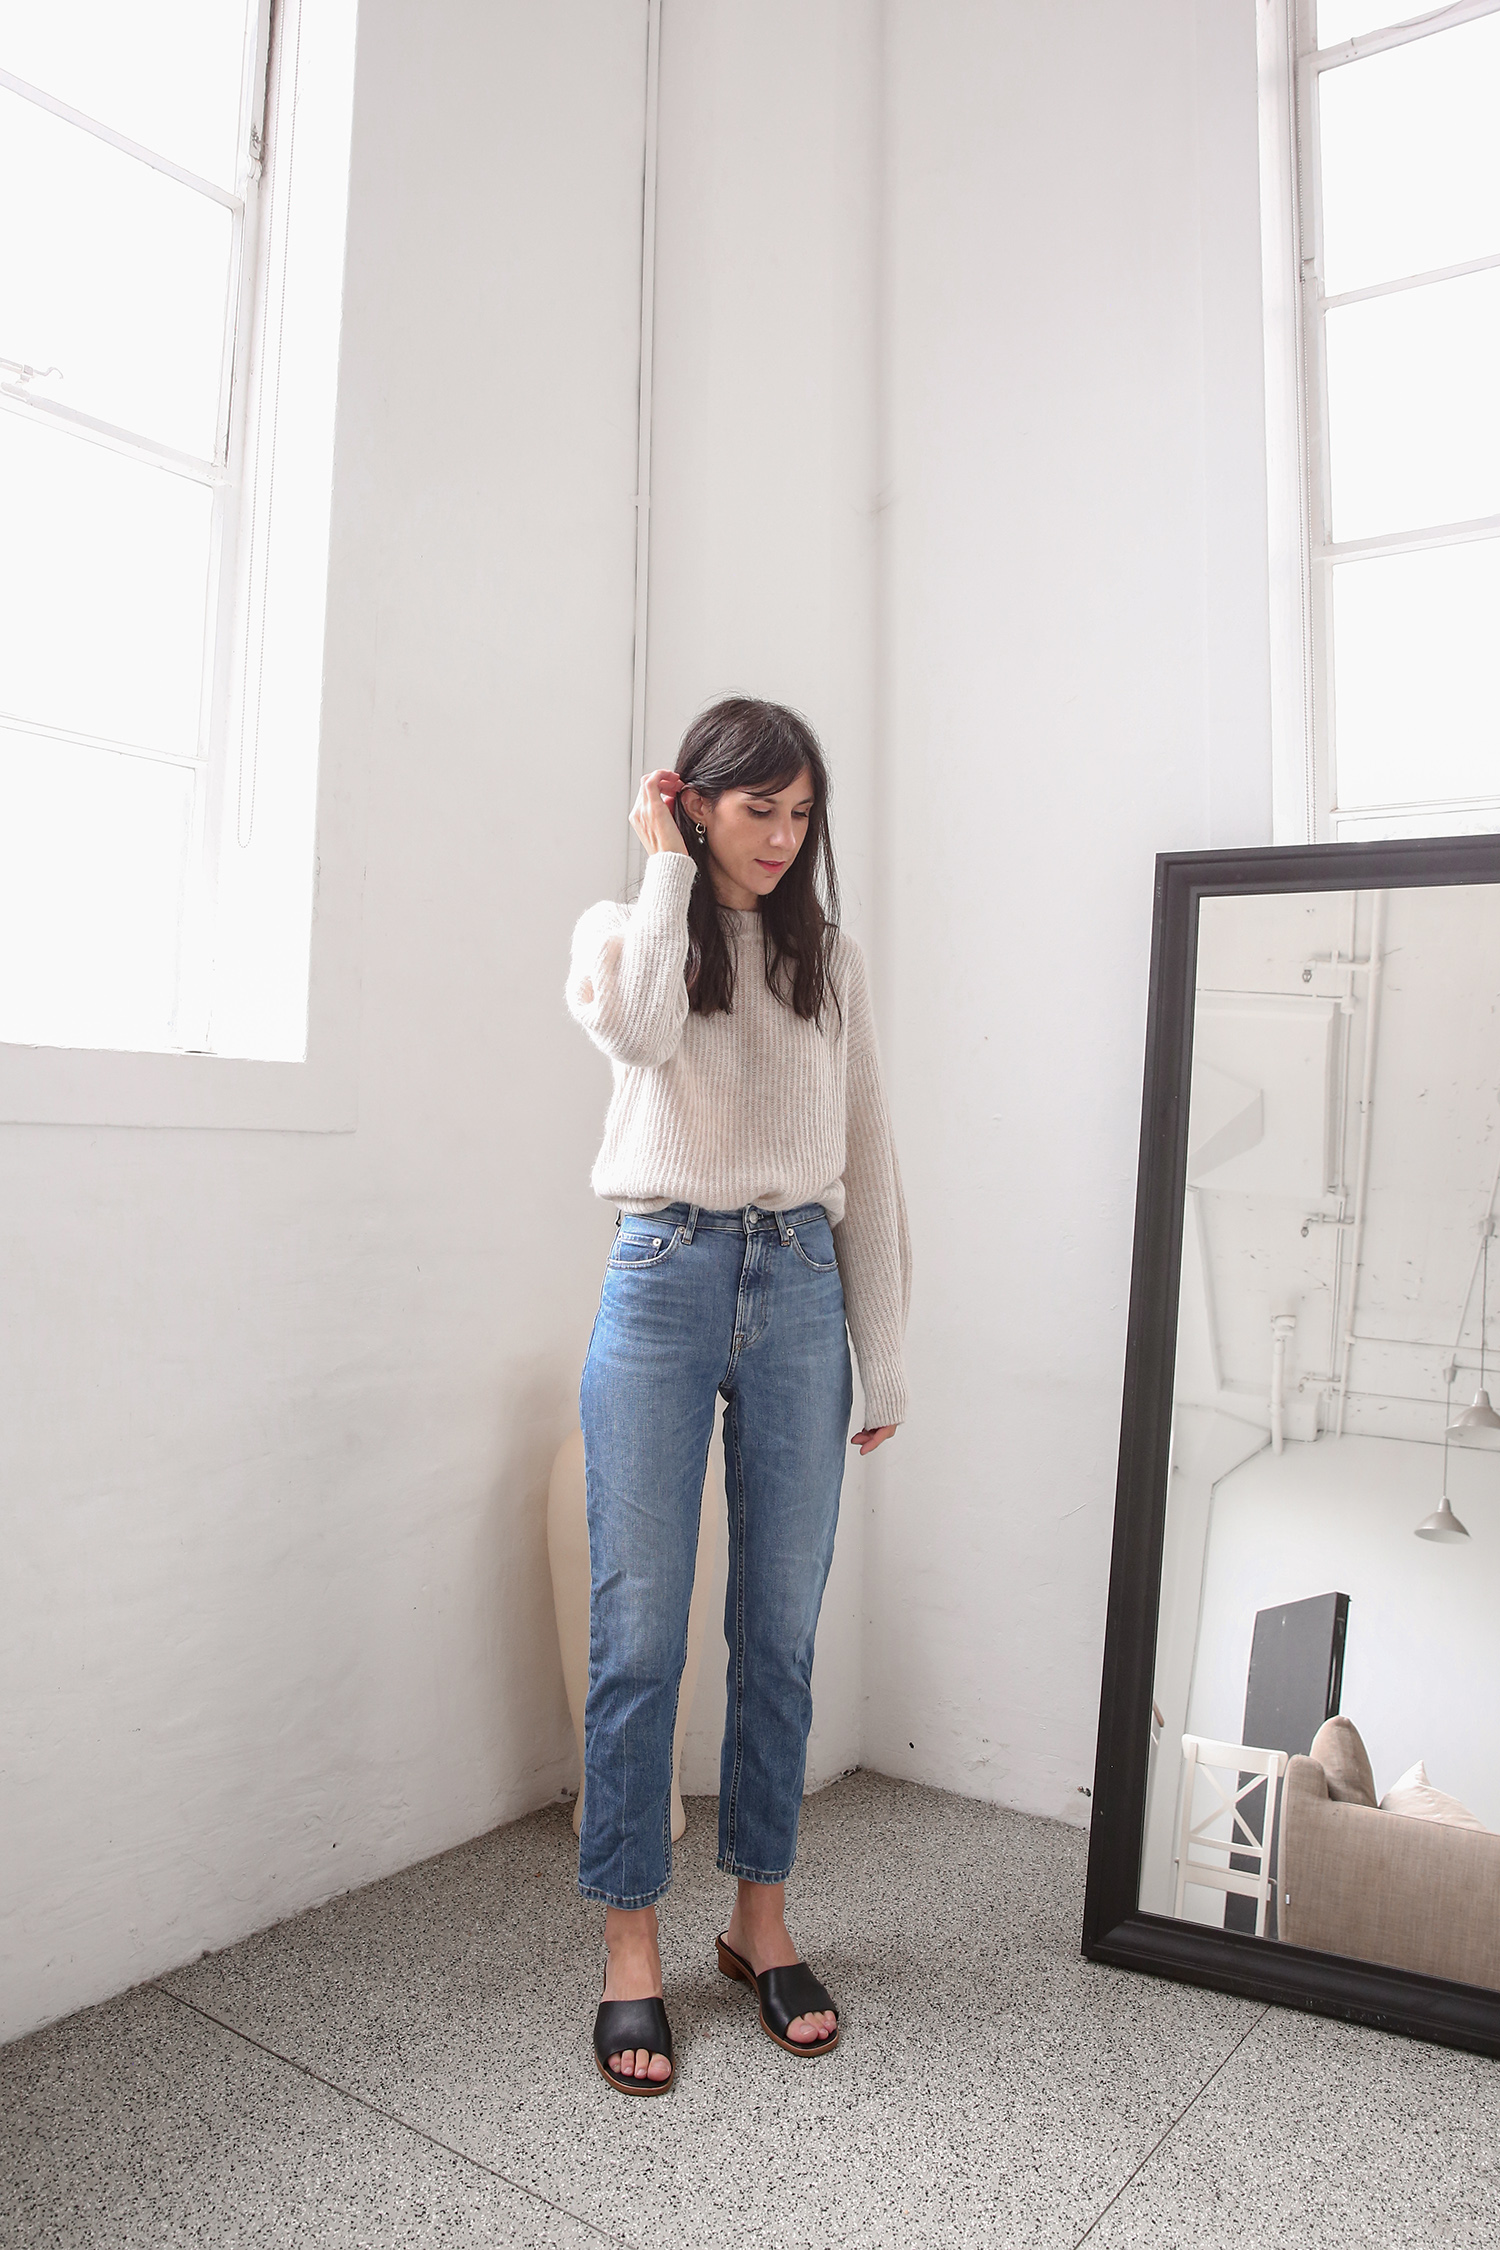 Everlane Jeans Review: 3 Styles Worth Buying Right Now - Emma